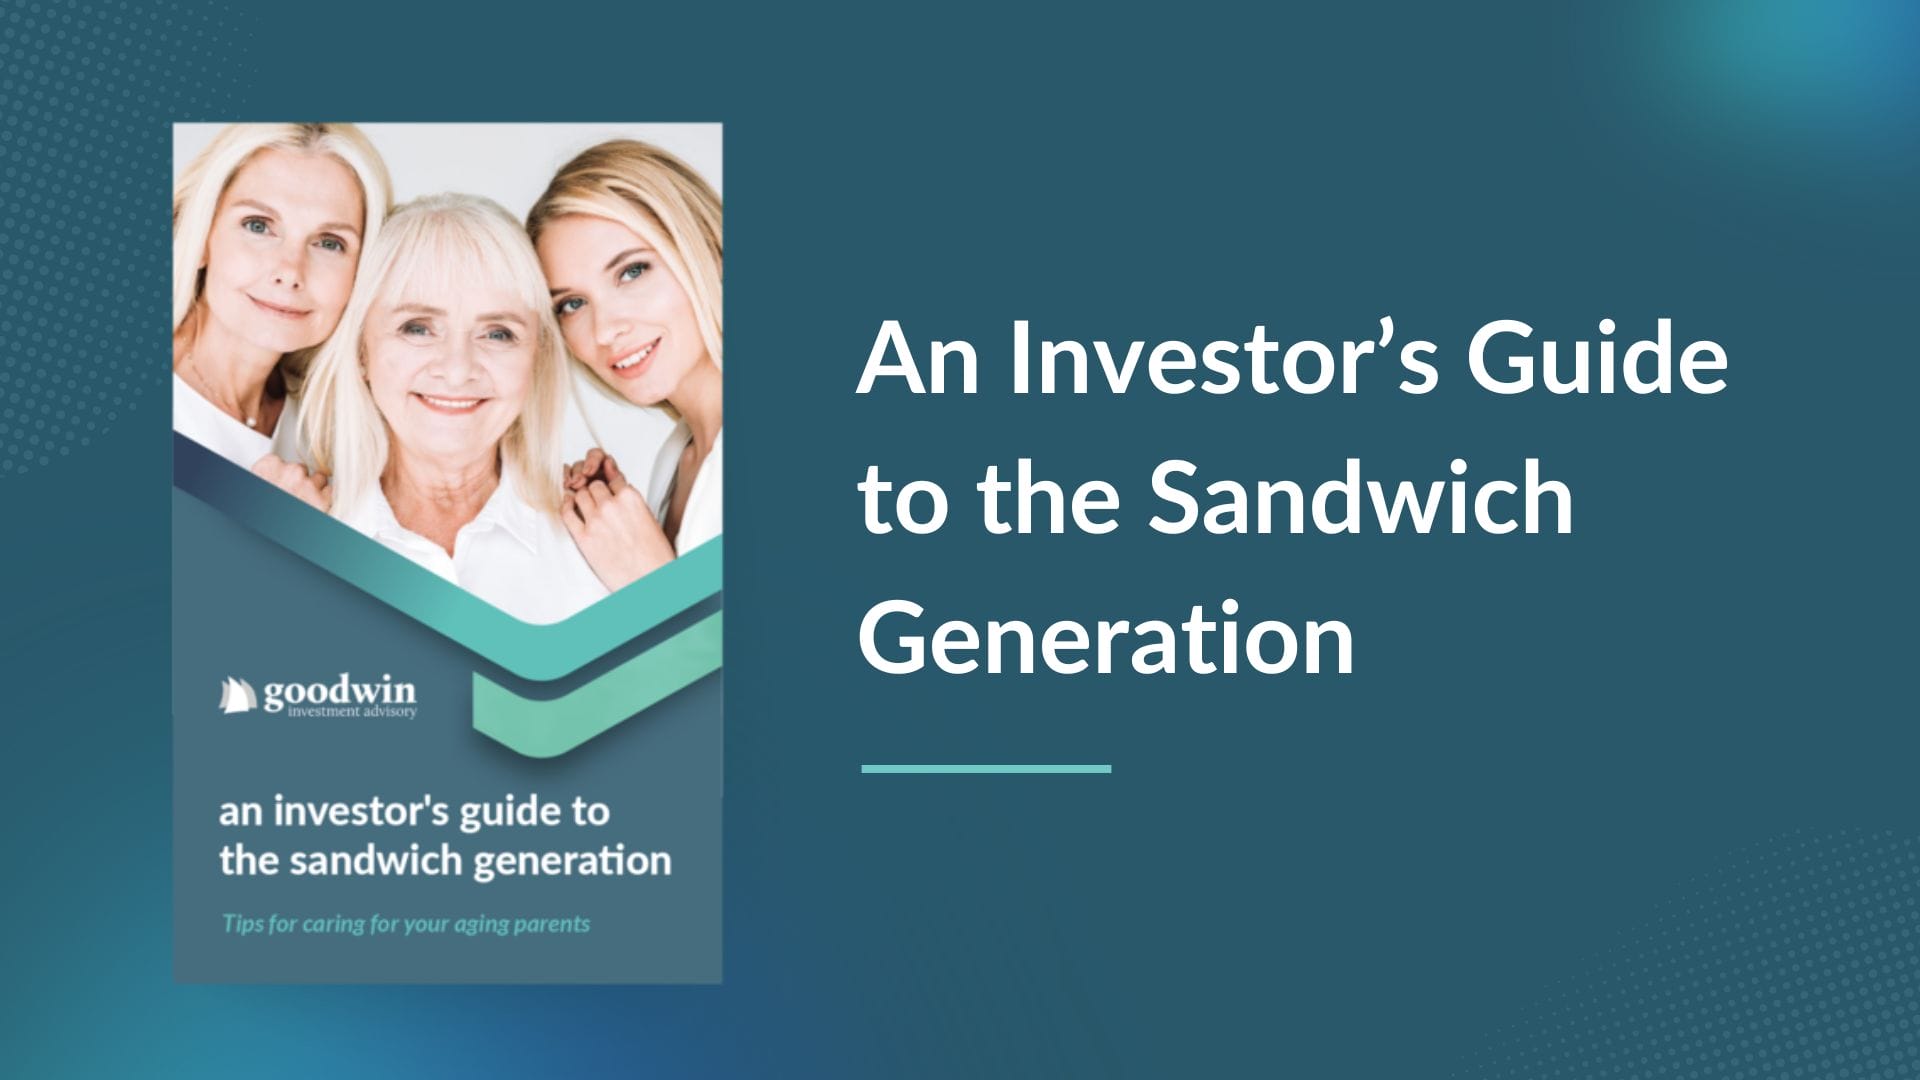 An Investor’s Guide to the Sandwich Generation